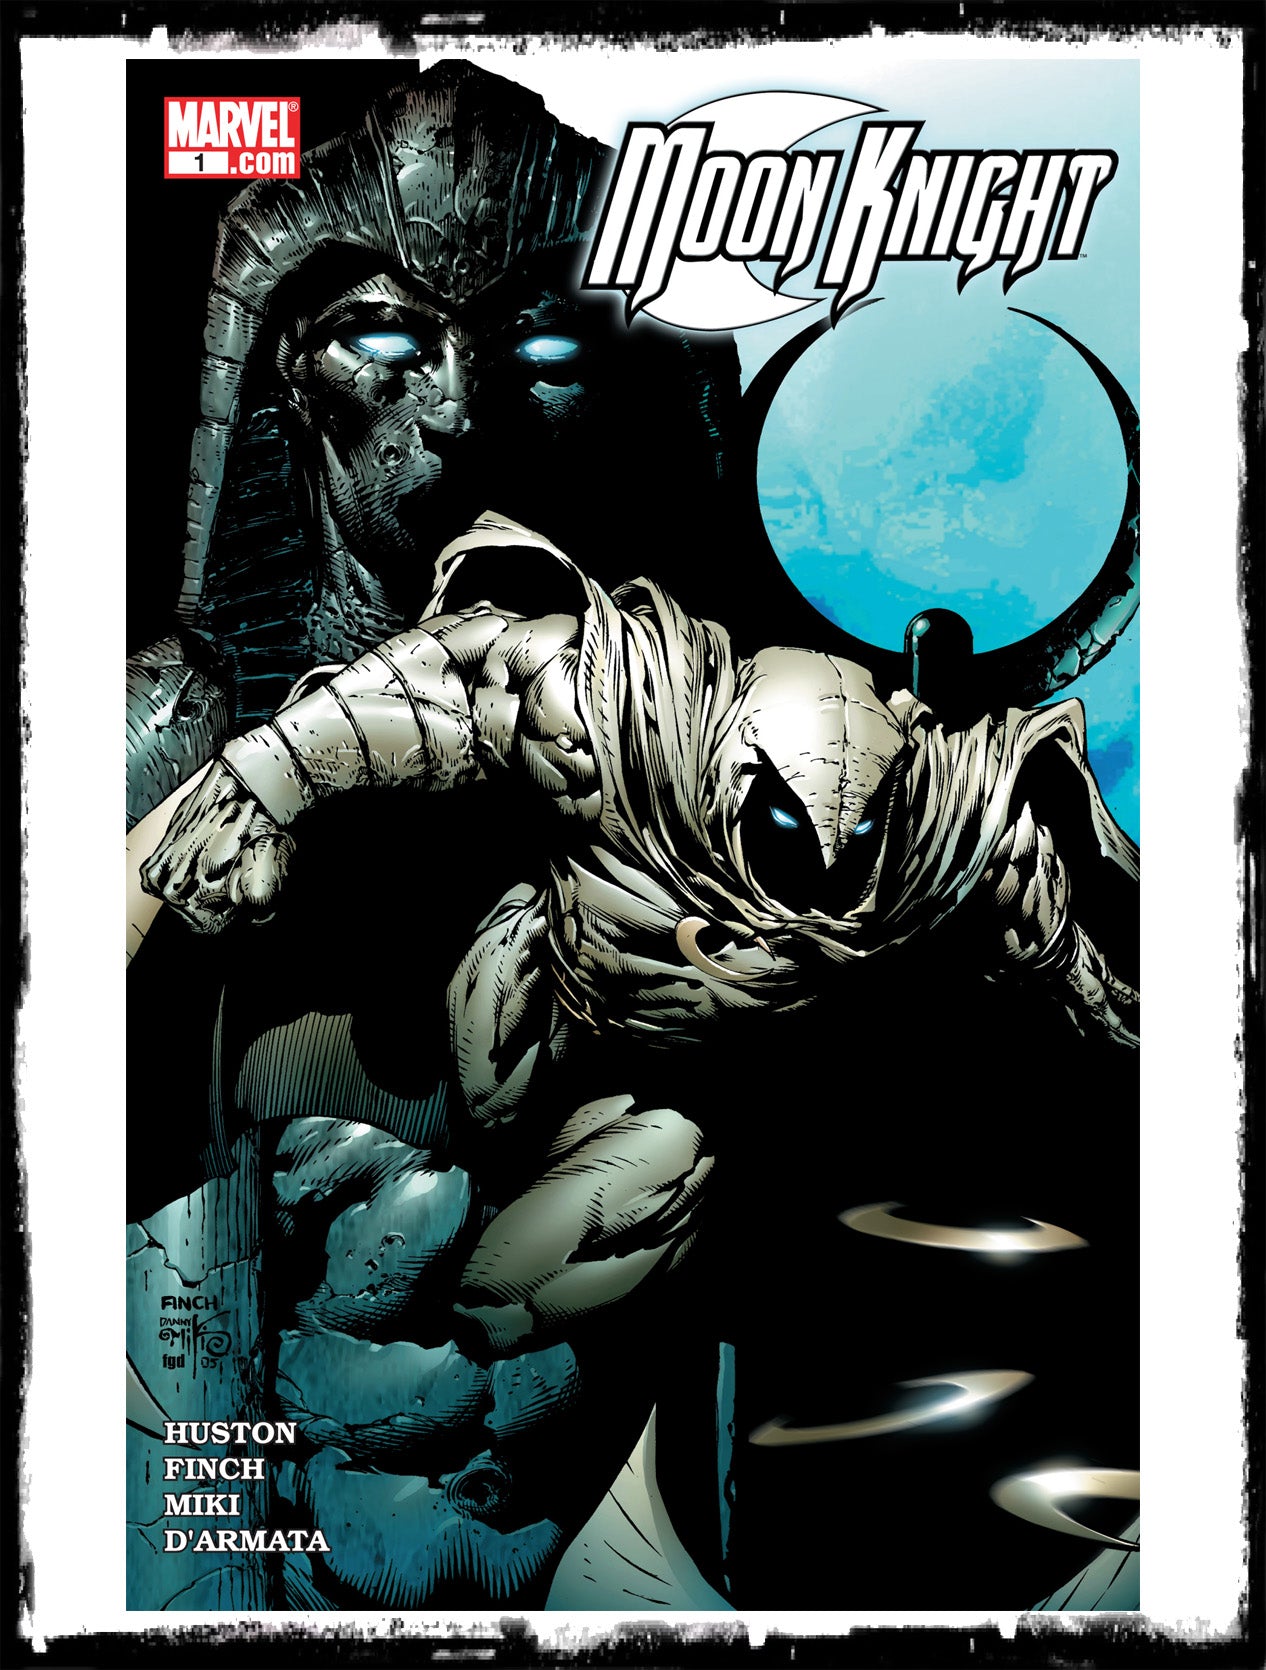 MOON KNIGHT - #1 HOT BOOK! DAVE FINCH COVER (2006 - NM)